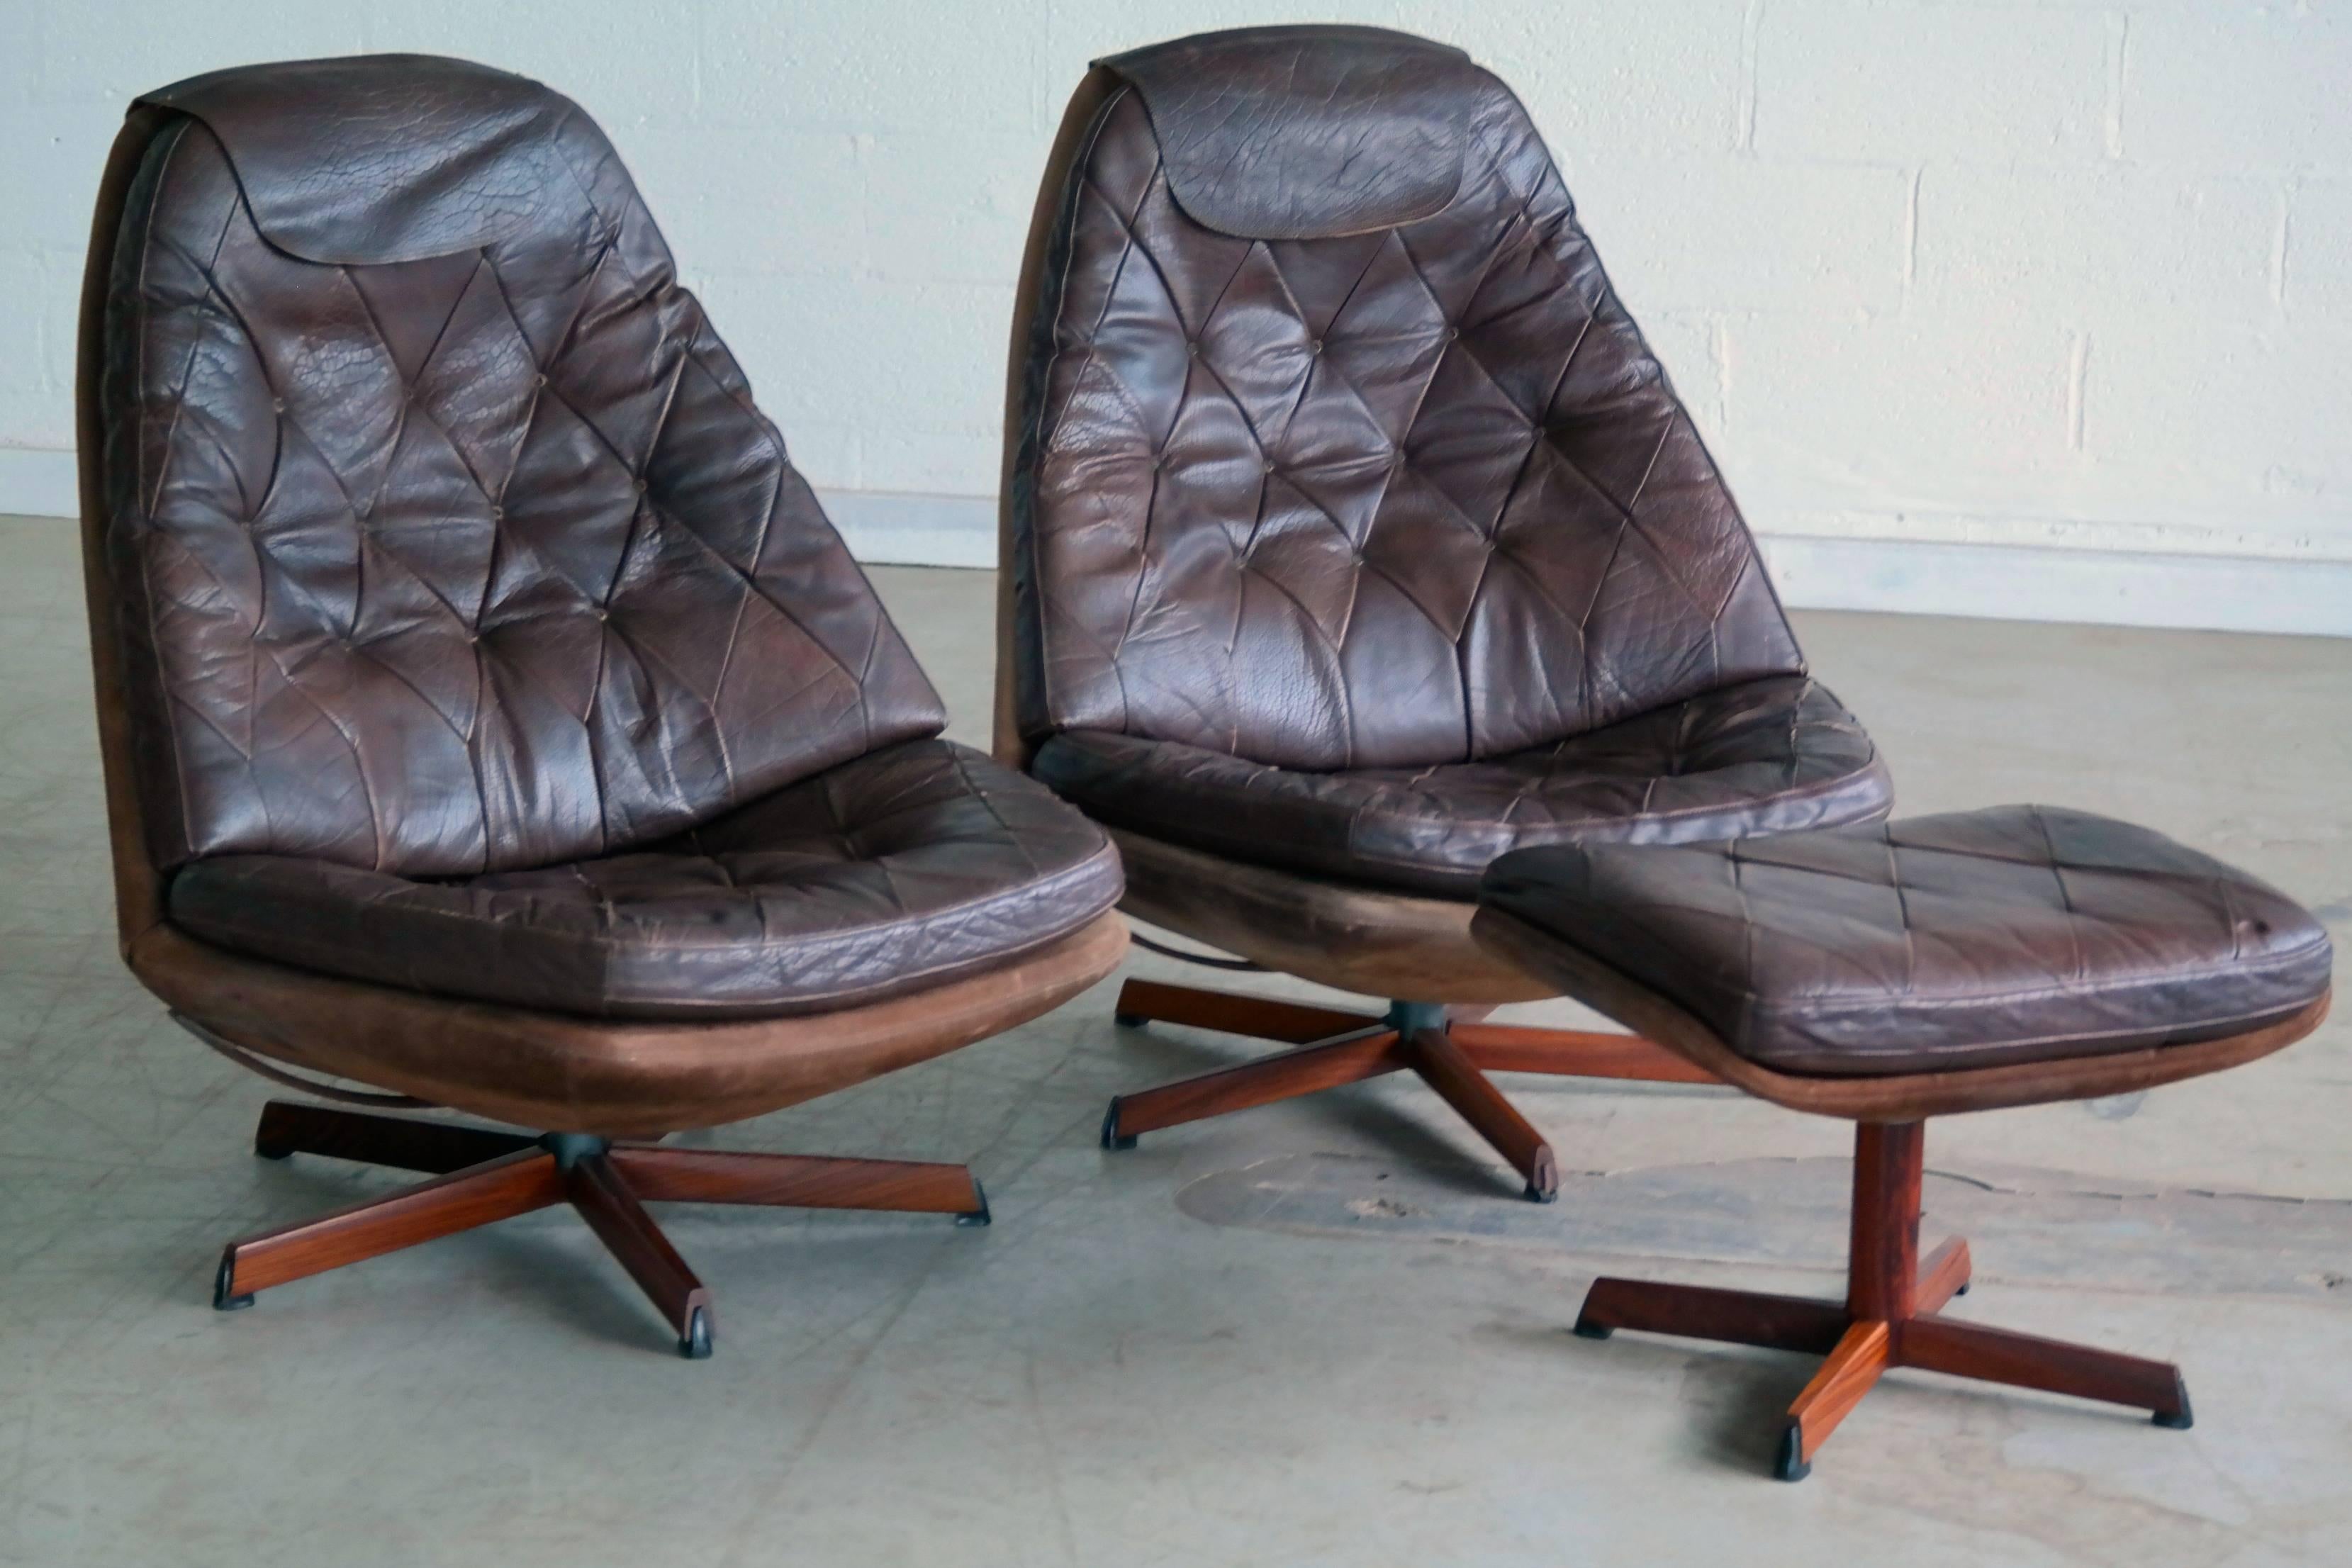 Pair of 1960s Danish leather swivel chairs with one matching ottoman and neck covers. These are simply some of the most scrumptious leather swivel chairs ever made. Top grain supple chocolate colored leather resting on a base covered in cognac